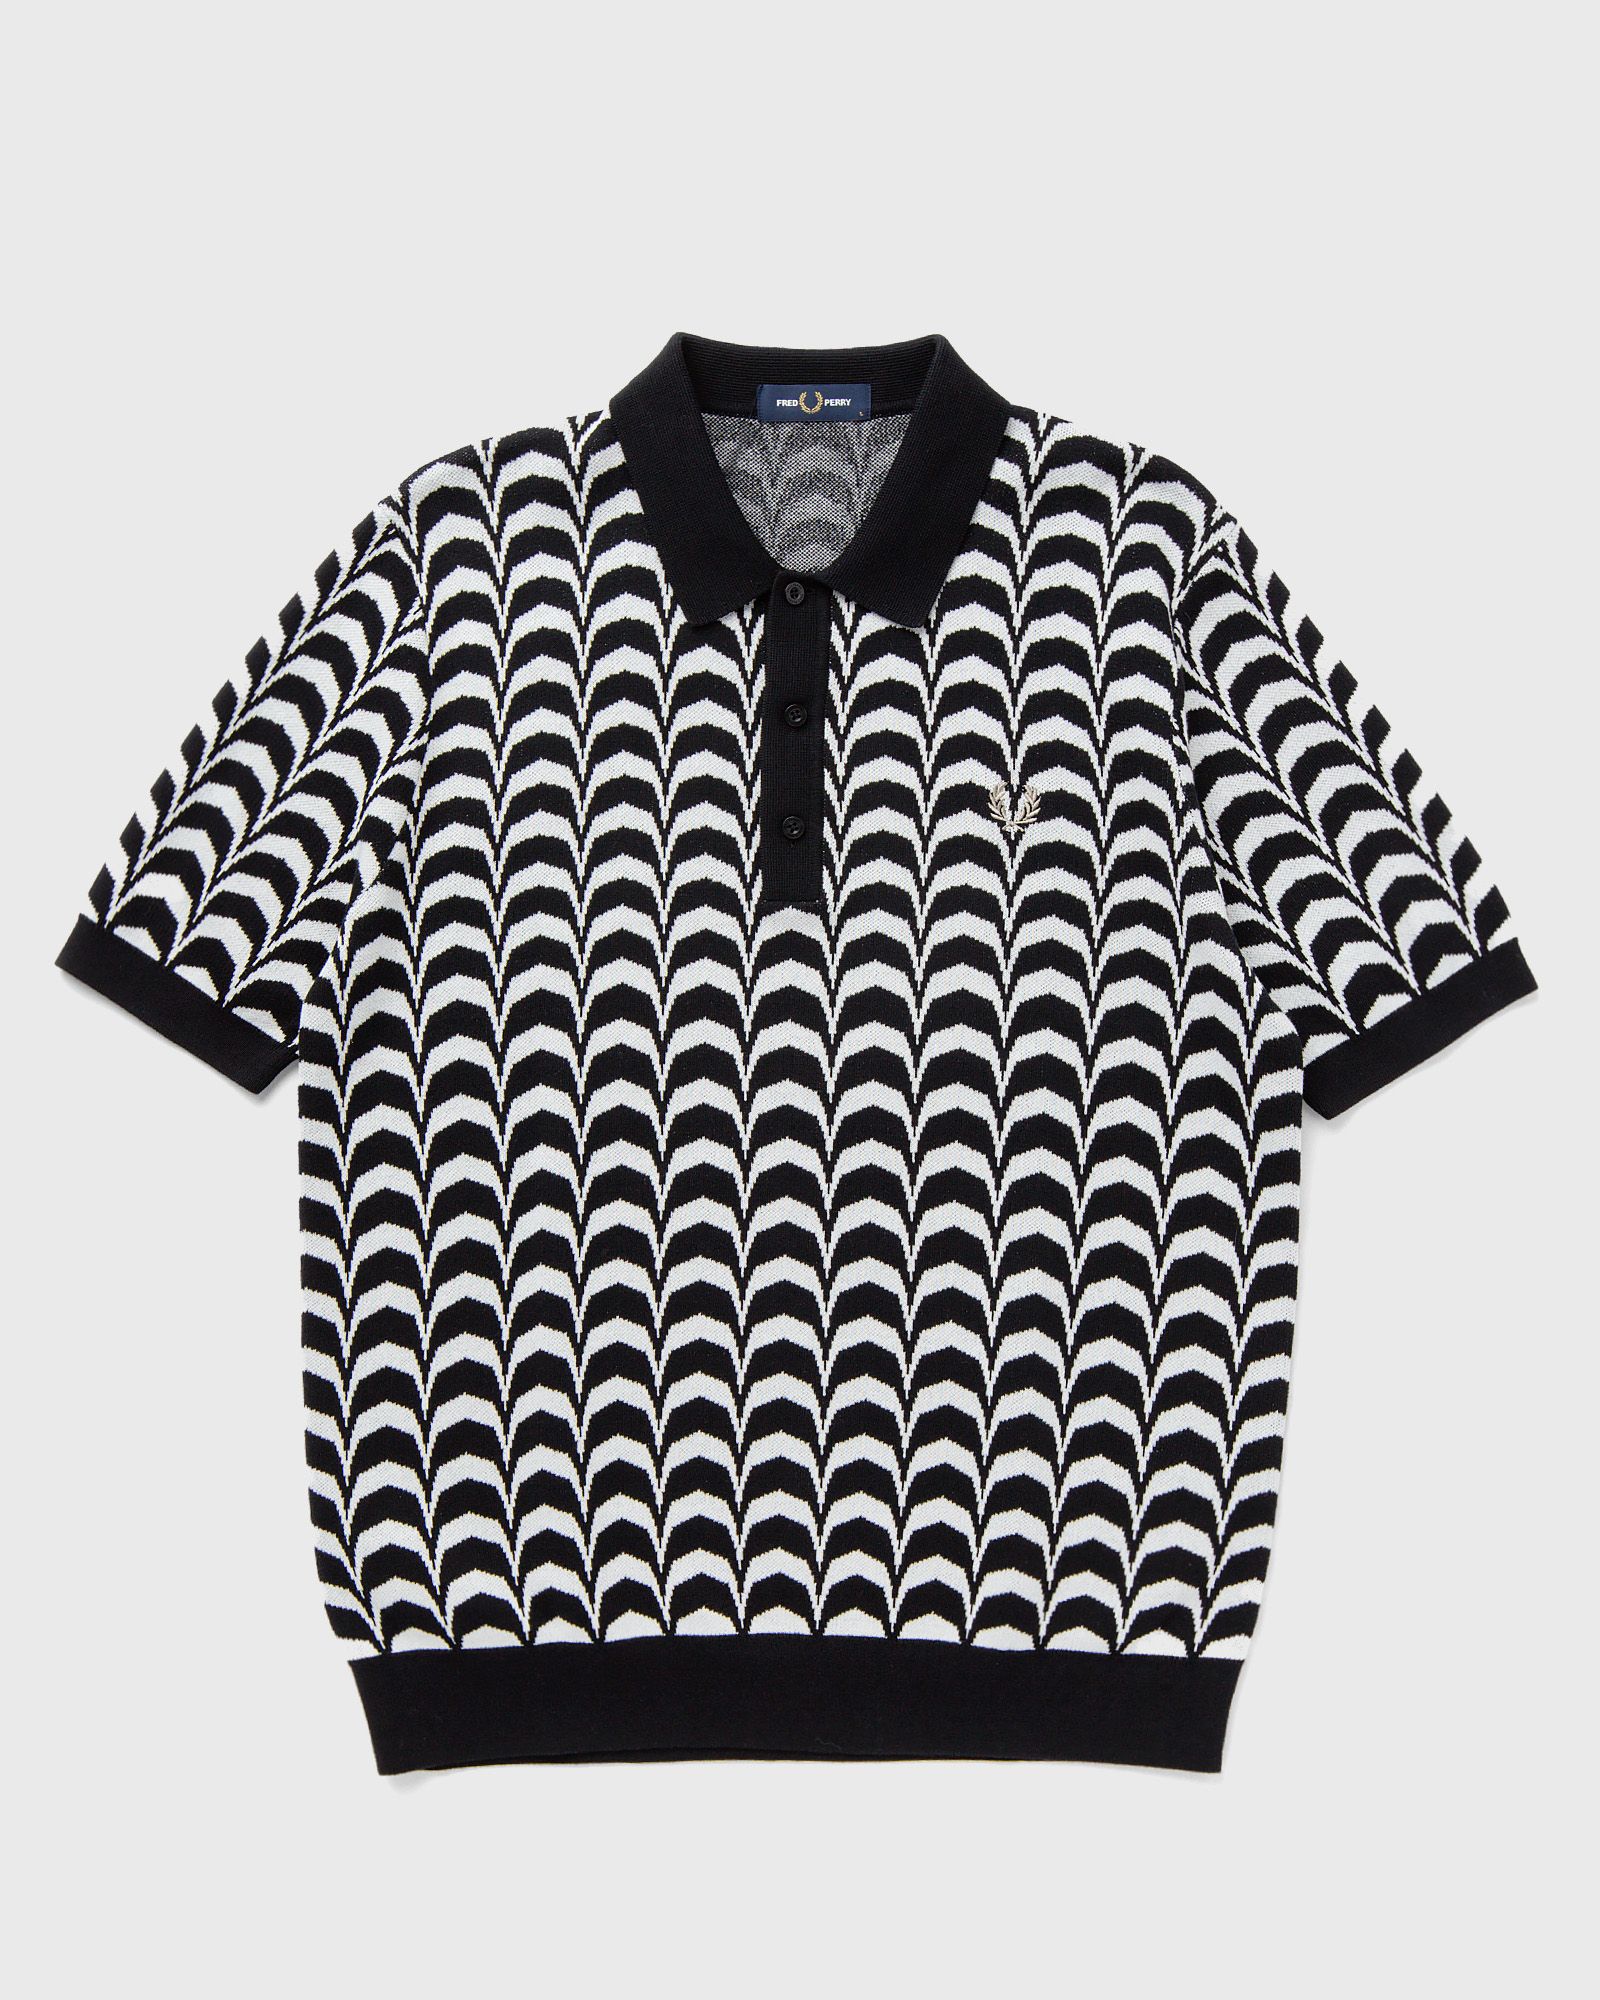 Fred Perry Jacquard Knitted Shirt men Polos black|white in Größe:XL von Fred Perry